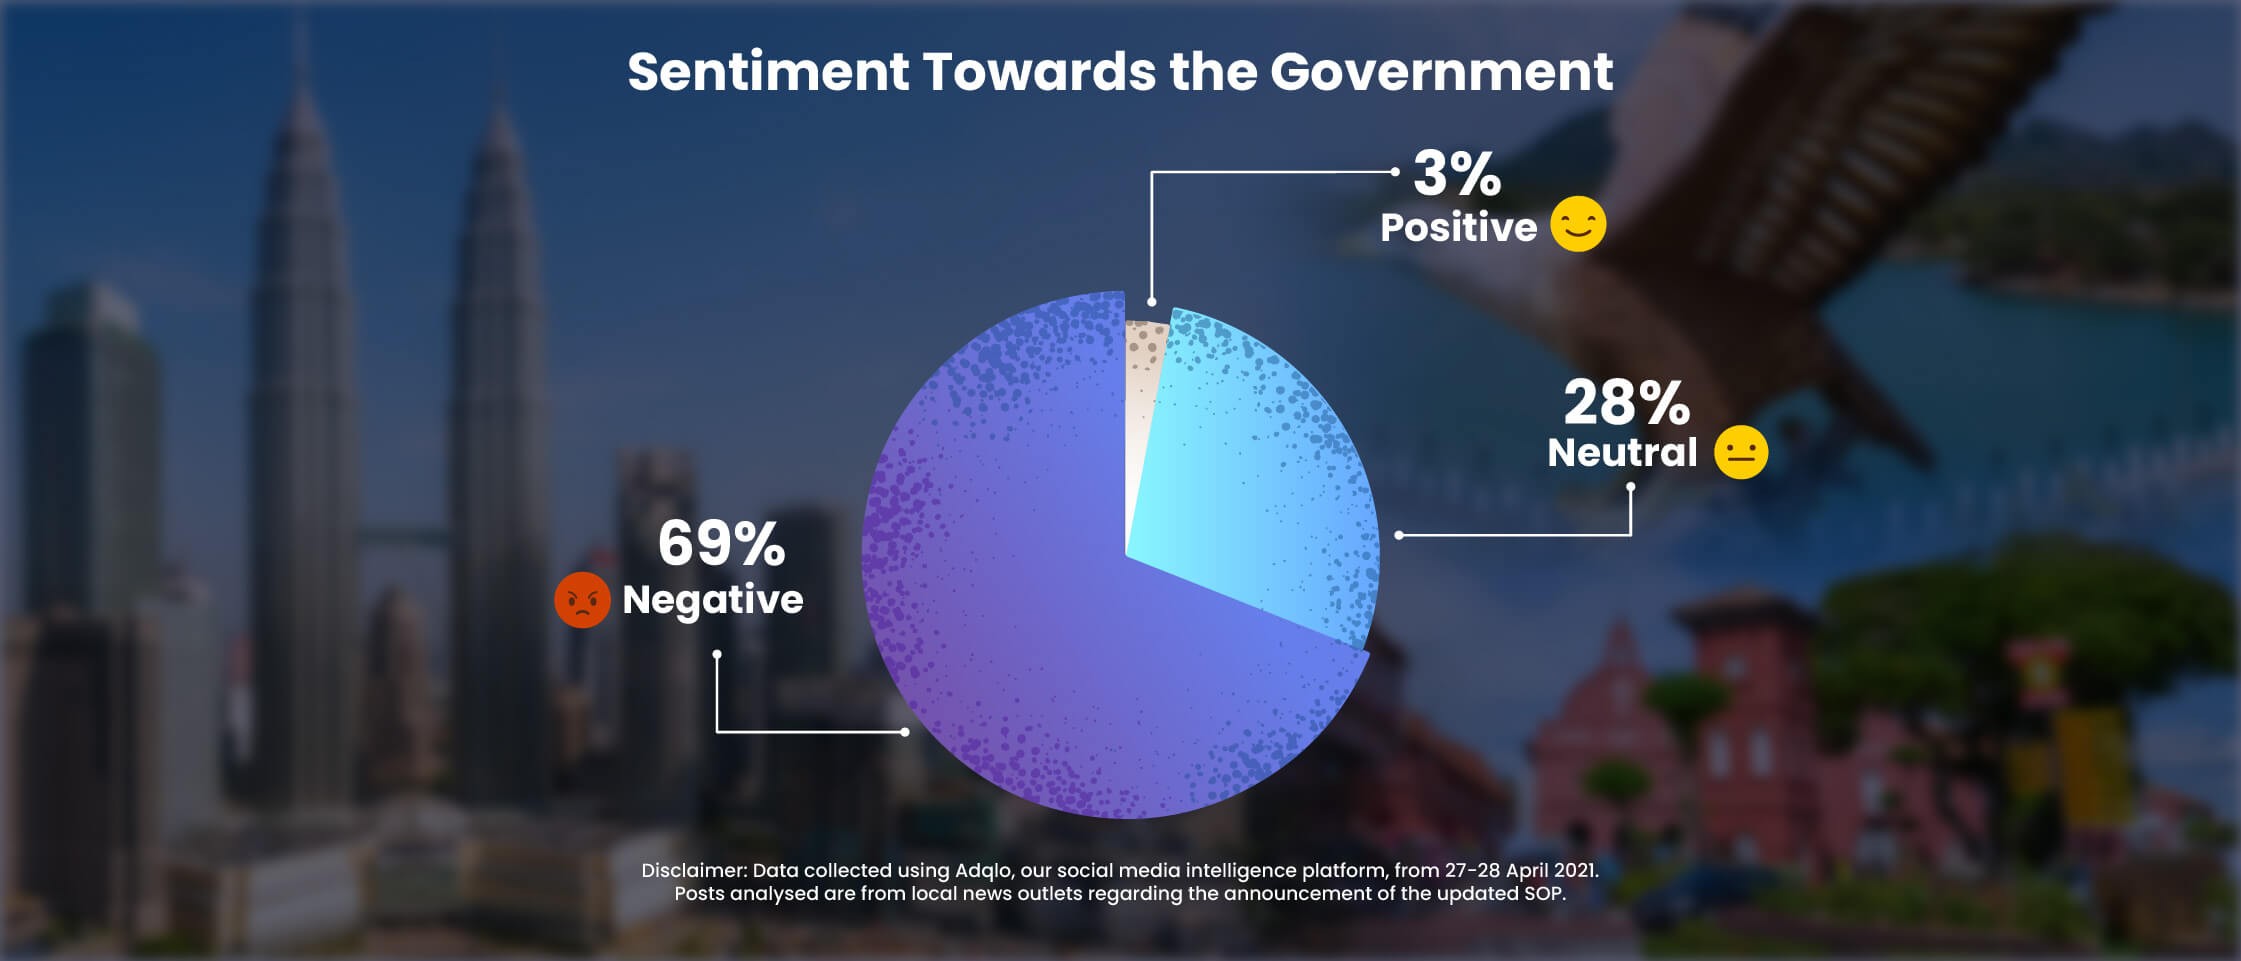 Sentiment Towards the Government